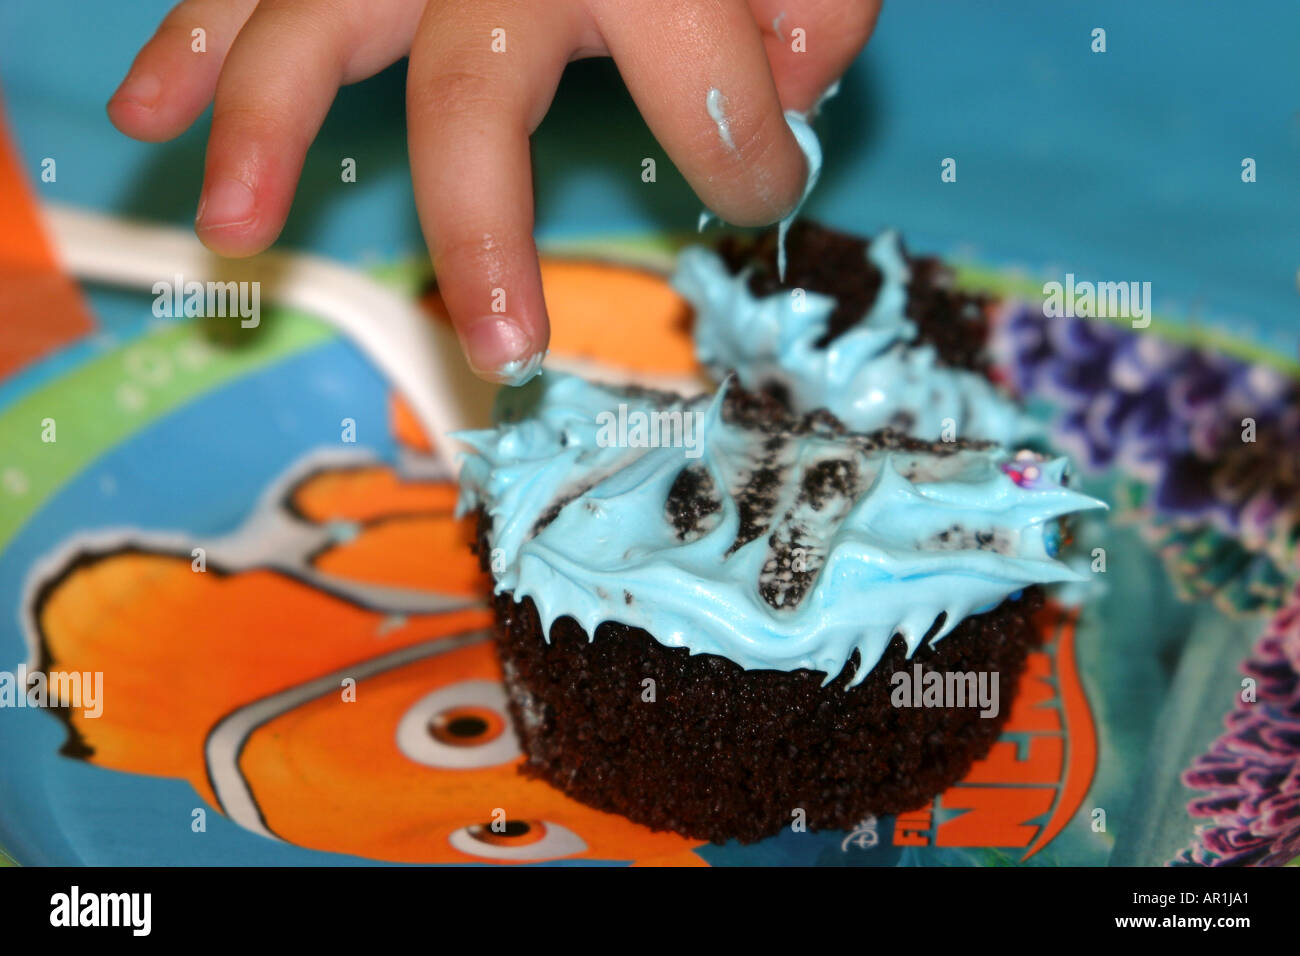 How to Make GLOW-IN-THE-DARK Cupcakes